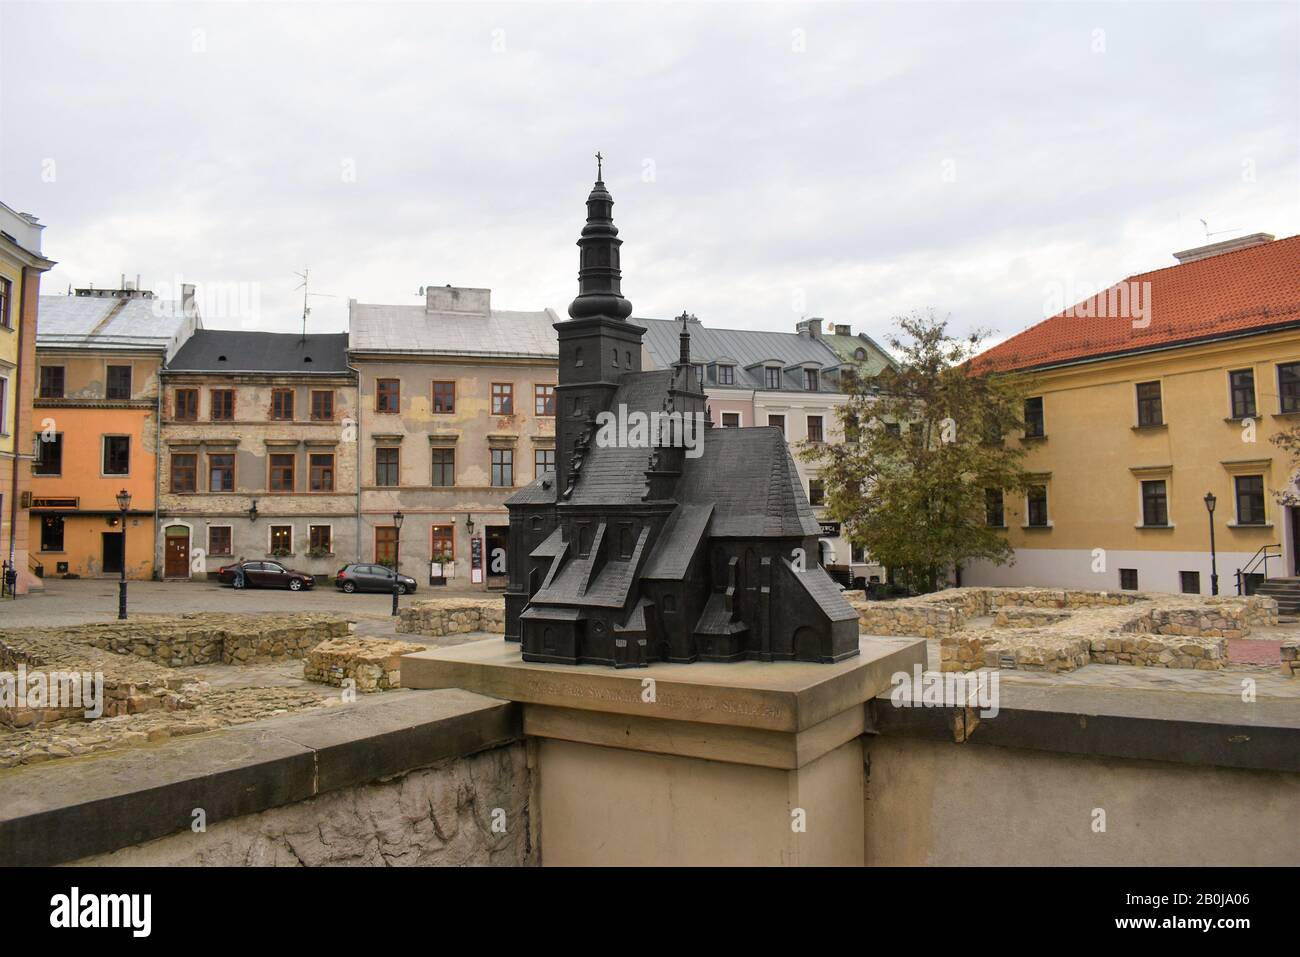 polish city, lublin old town Stock Photo